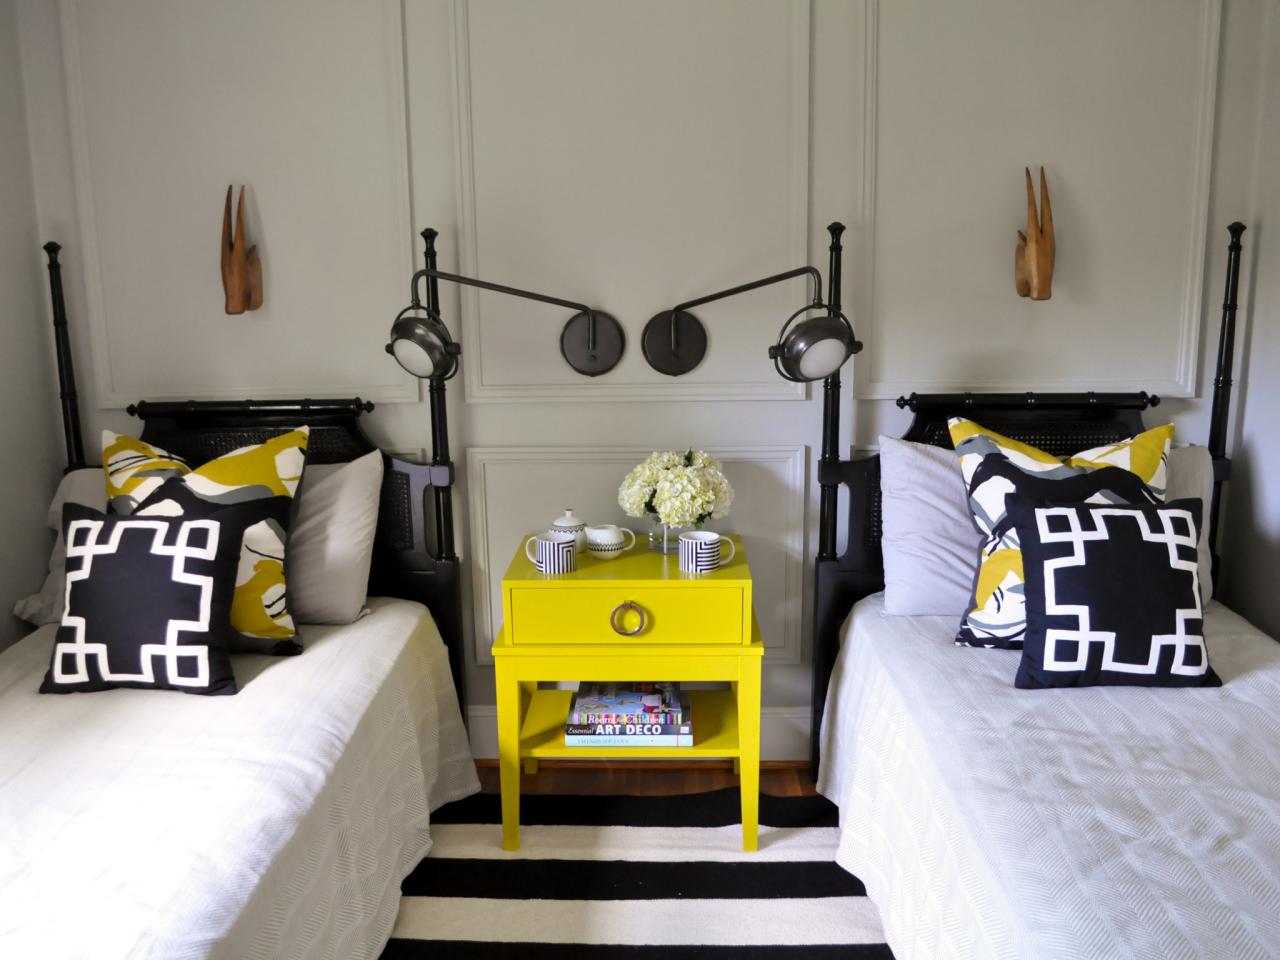 Rs ashley delapp yellow black white electic guest room beds h.jpg.rend.hgtvcom.1280.960